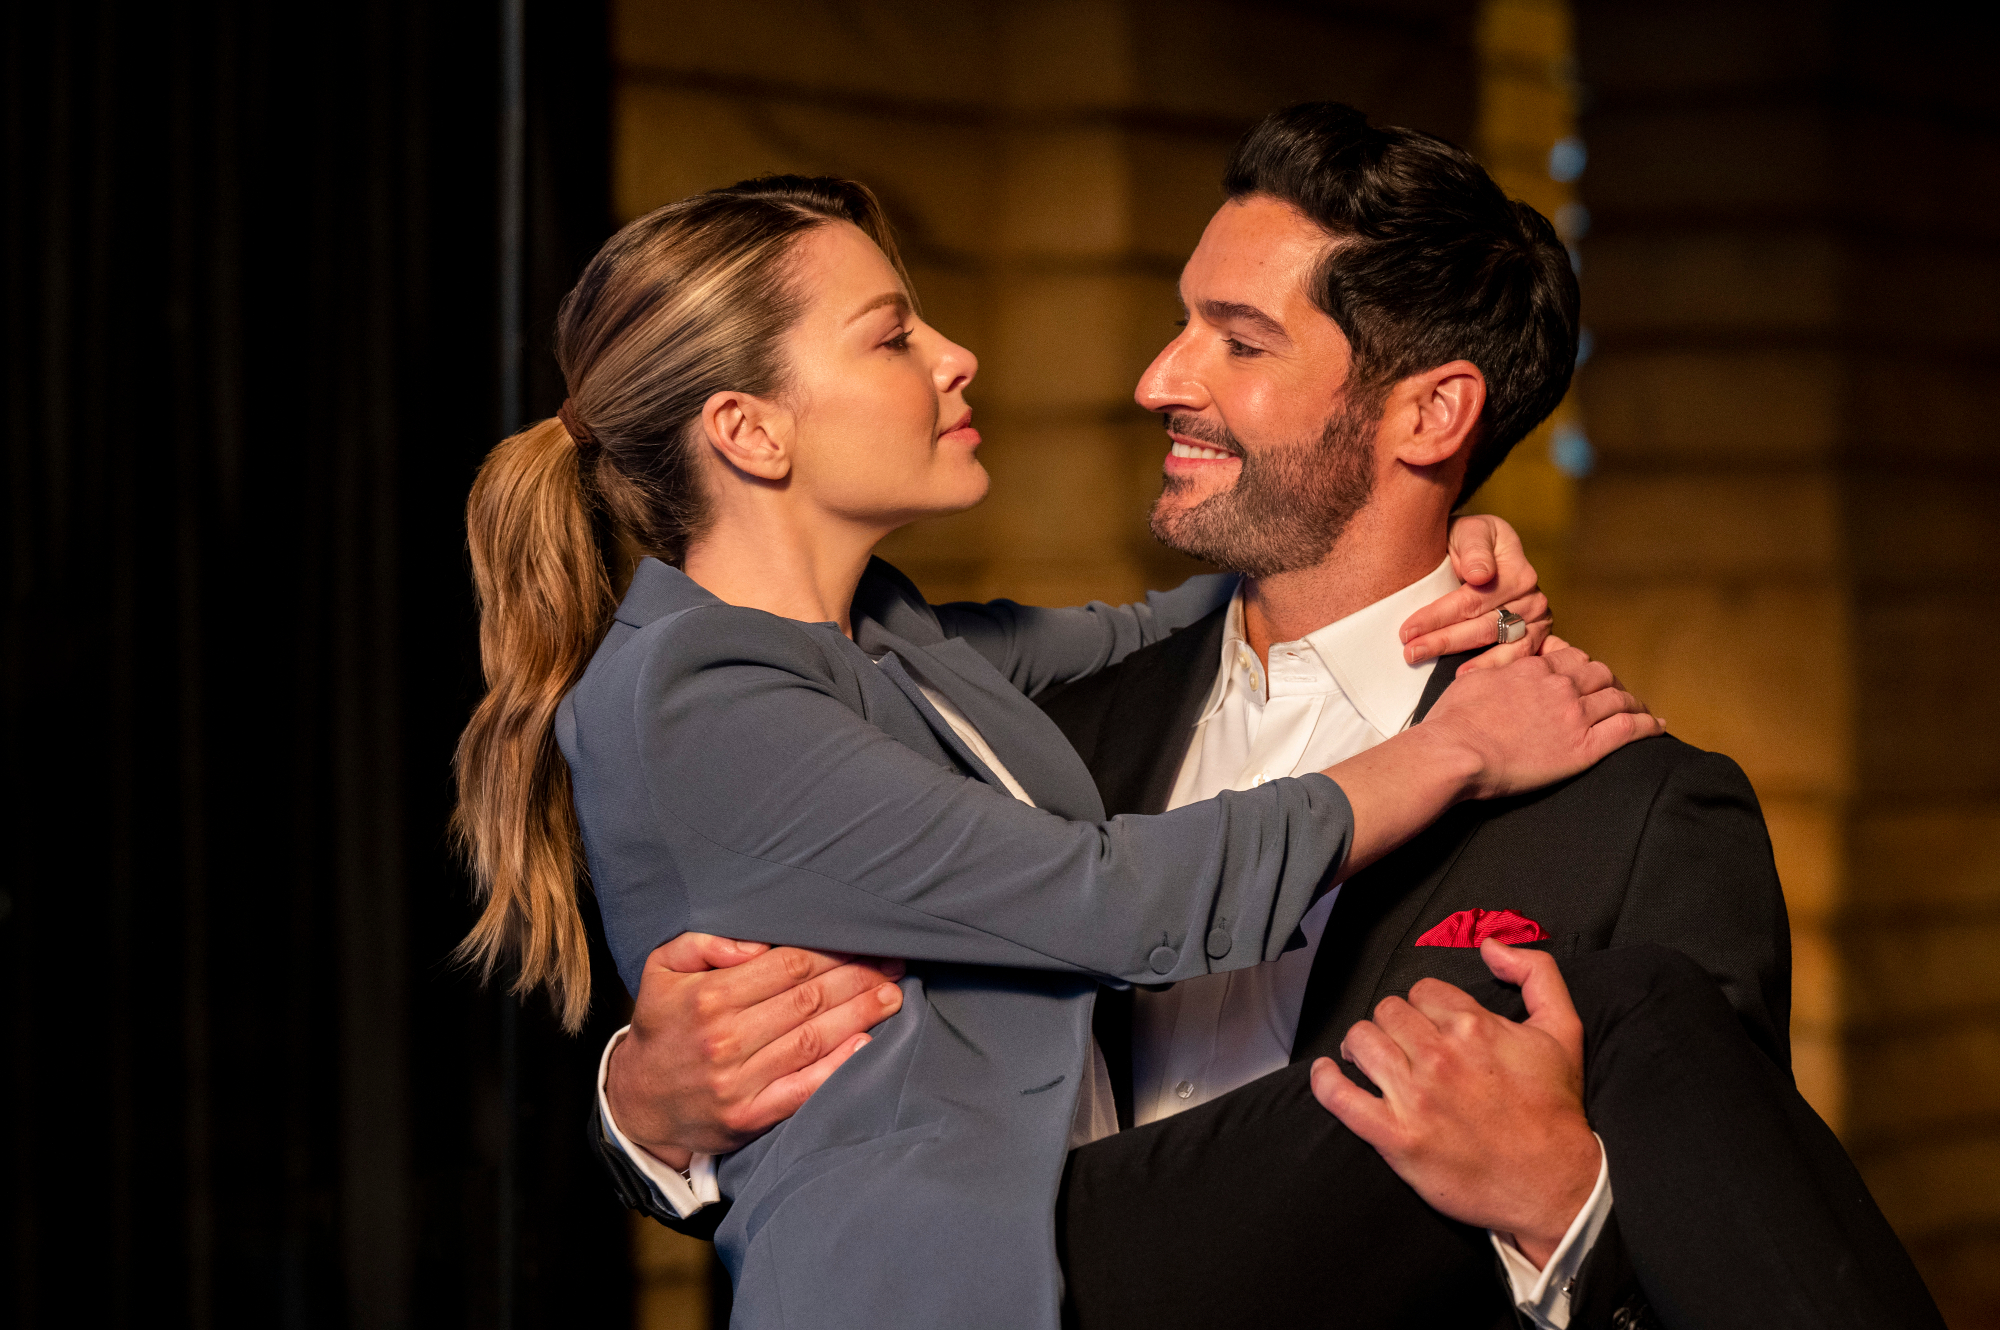 Lauren German and Tom Ellis as Chloe Decker and Lucifer Morningstar in 'Lucifer,' one of the best canceled shows picked up by another network.